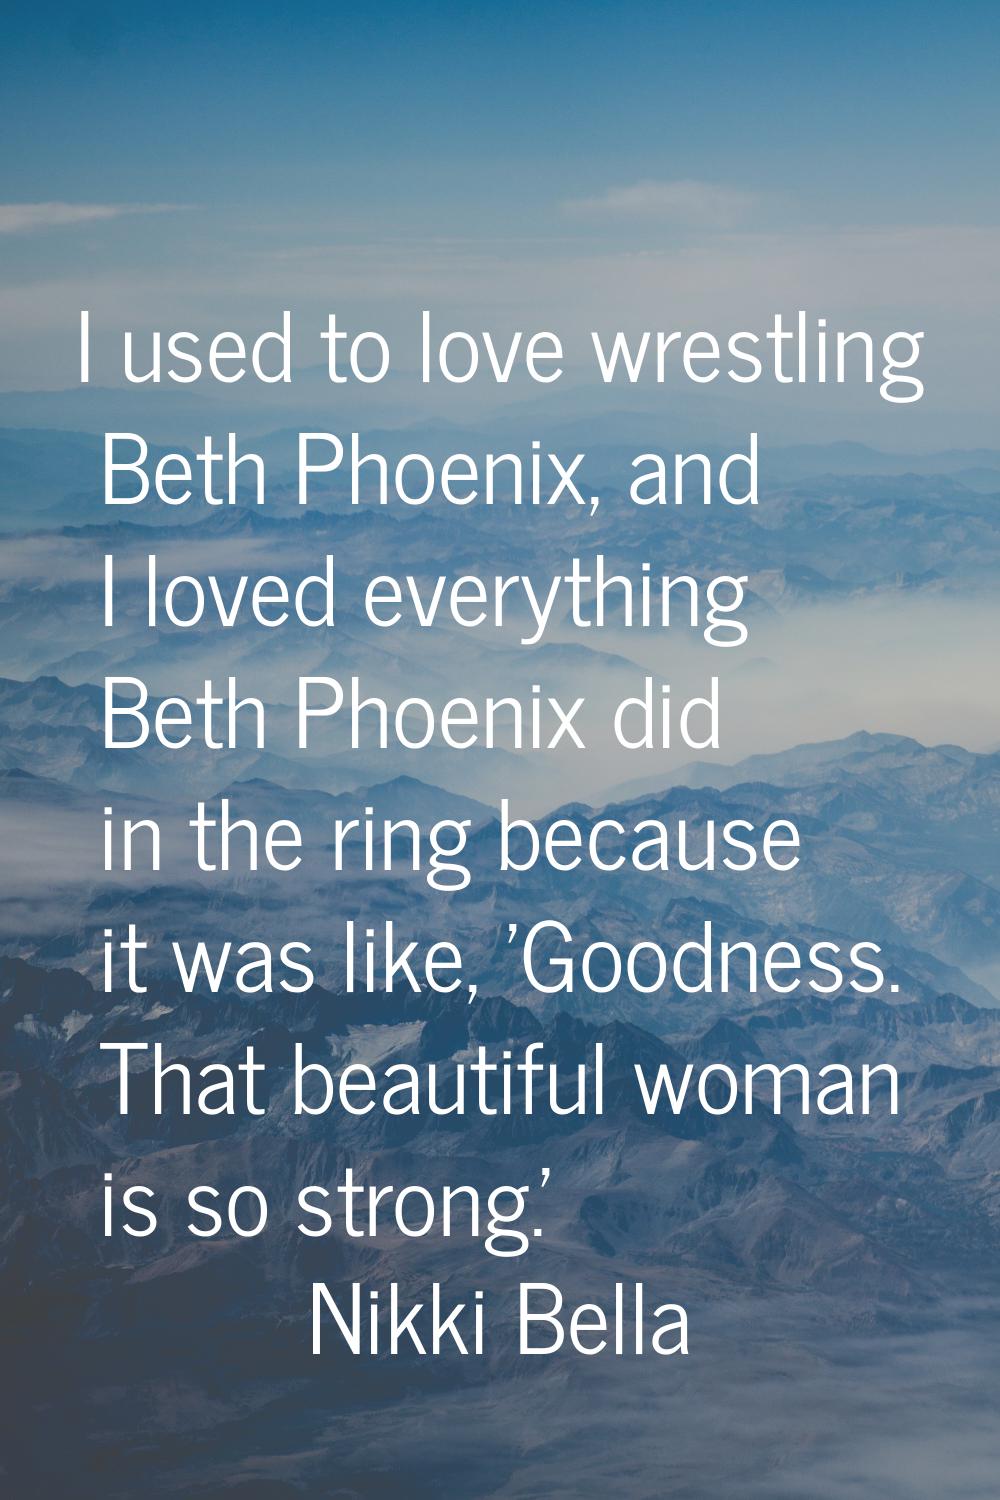 I used to love wrestling Beth Phoenix, and I loved everything Beth Phoenix did in the ring because 